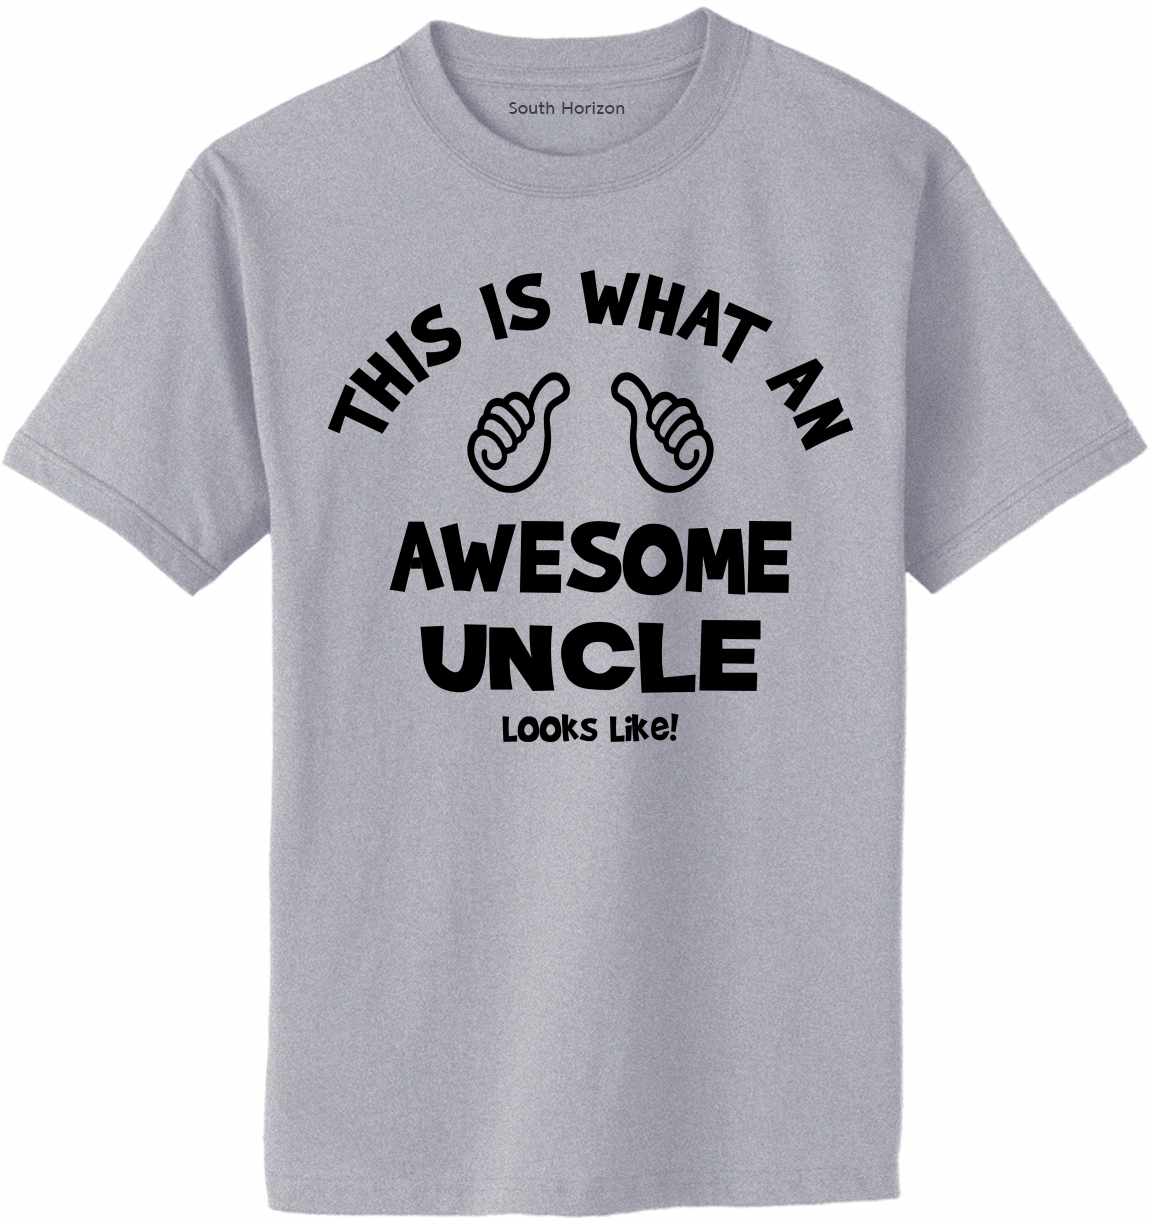 This is What an Awesome Uncle Looks Like Adult T-Shirt